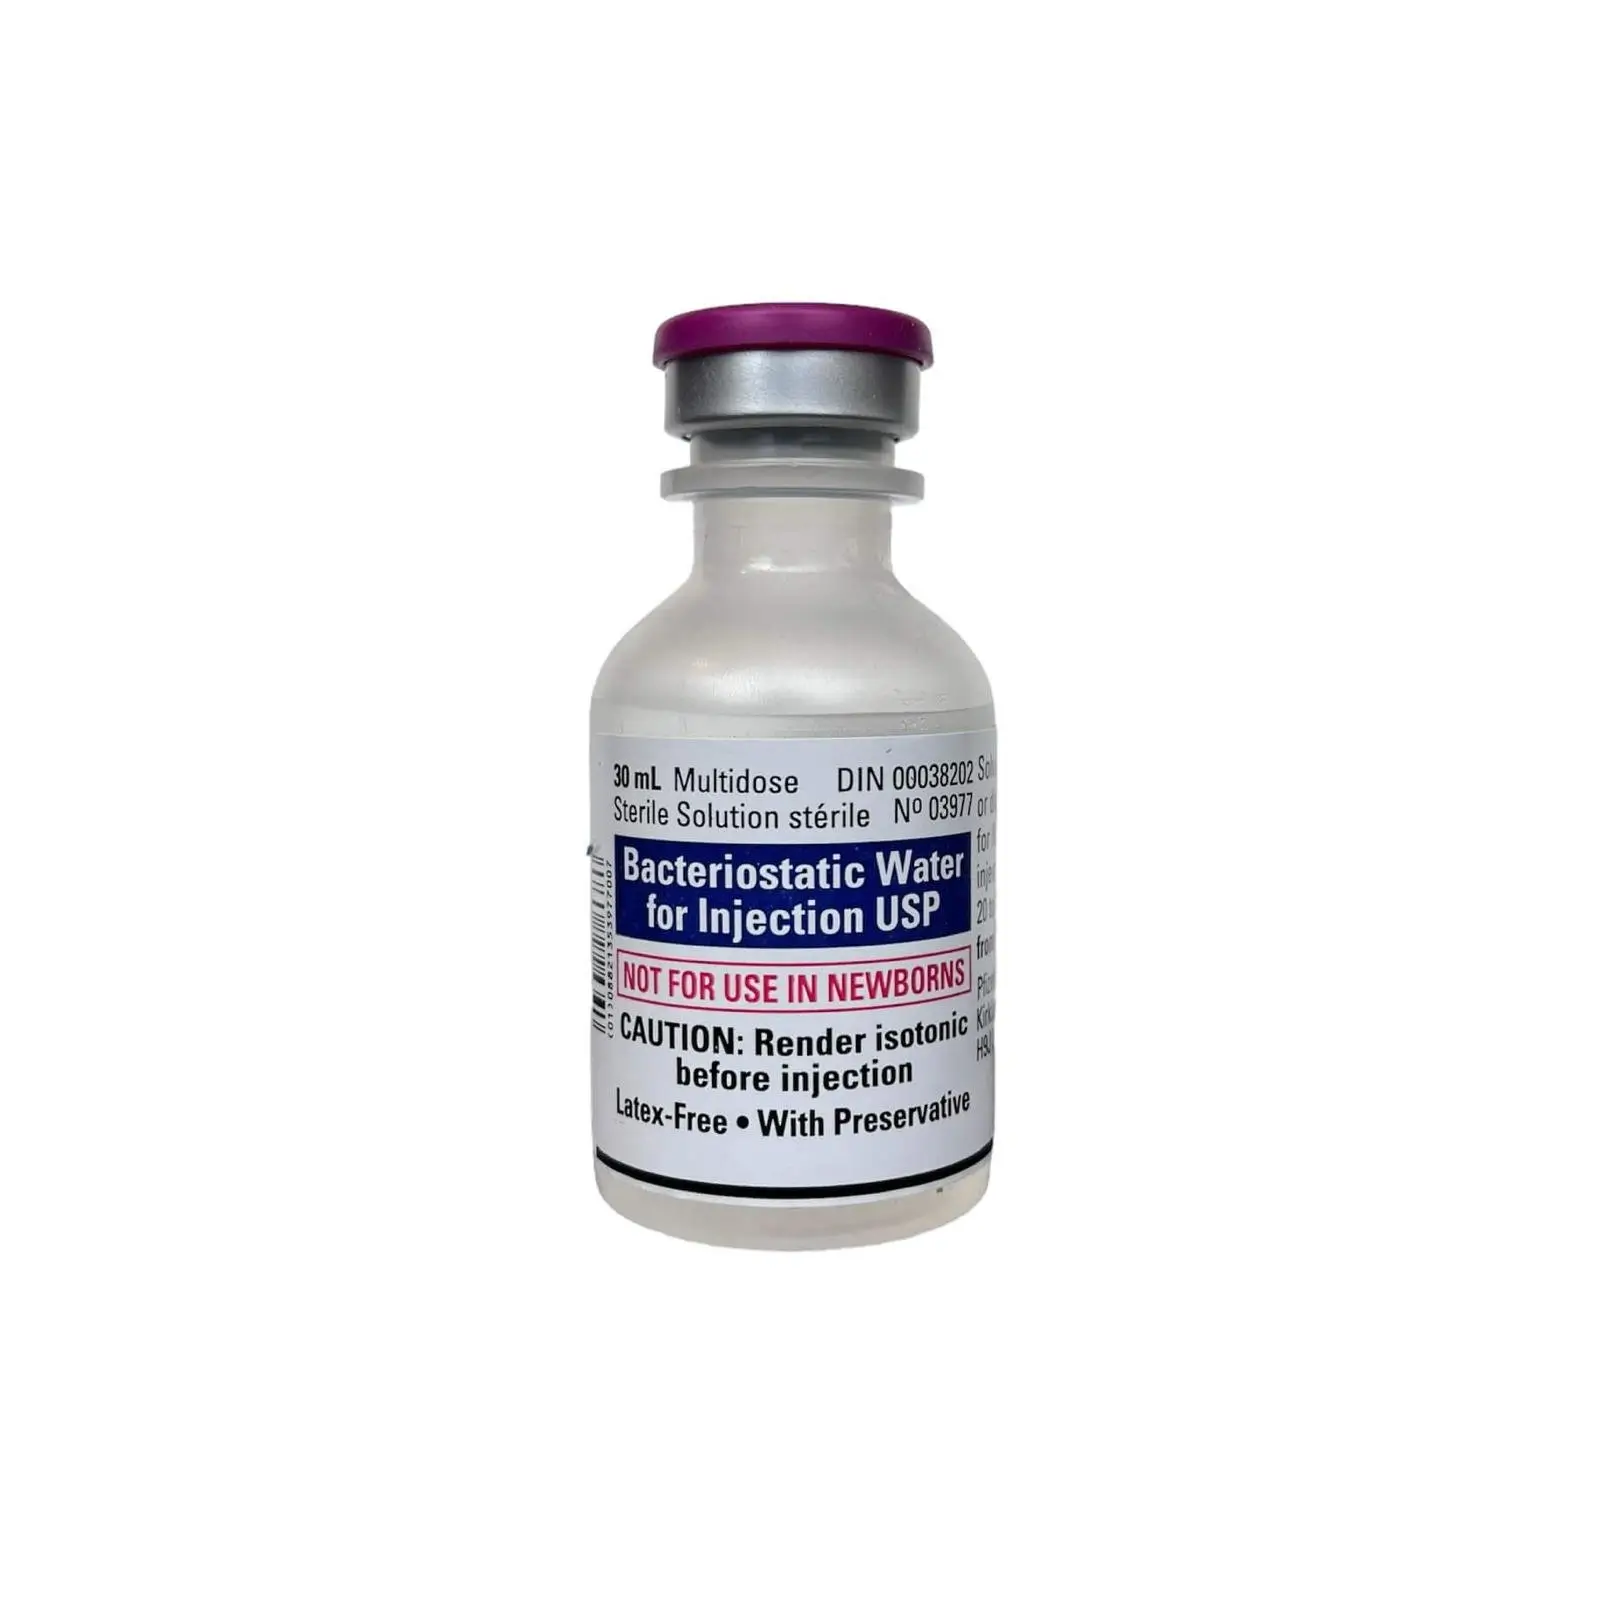 Bacteriostatic water for injection in a 30ml vial with benzyl alcohol, used for diluting peptides, from Omega Full Potential.